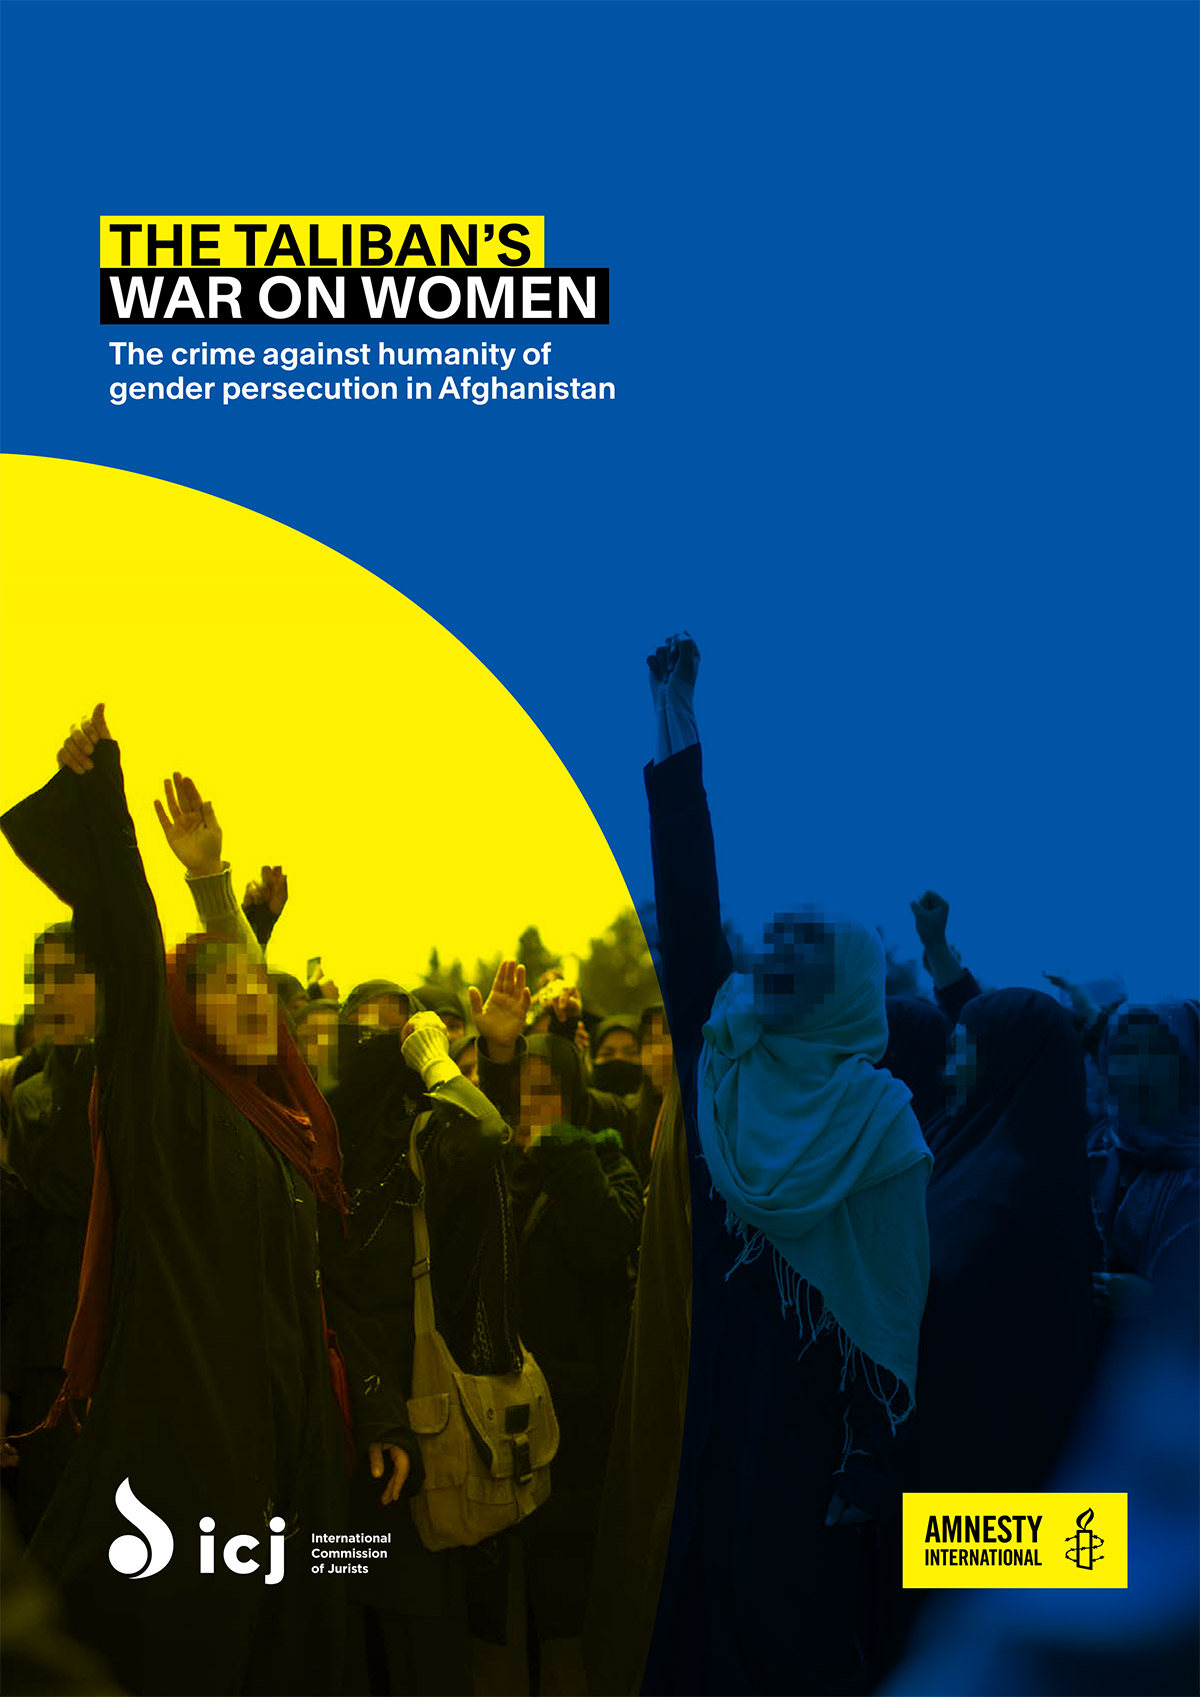 Report of the Amnesty International on Afghan women under the rule of the Taliban